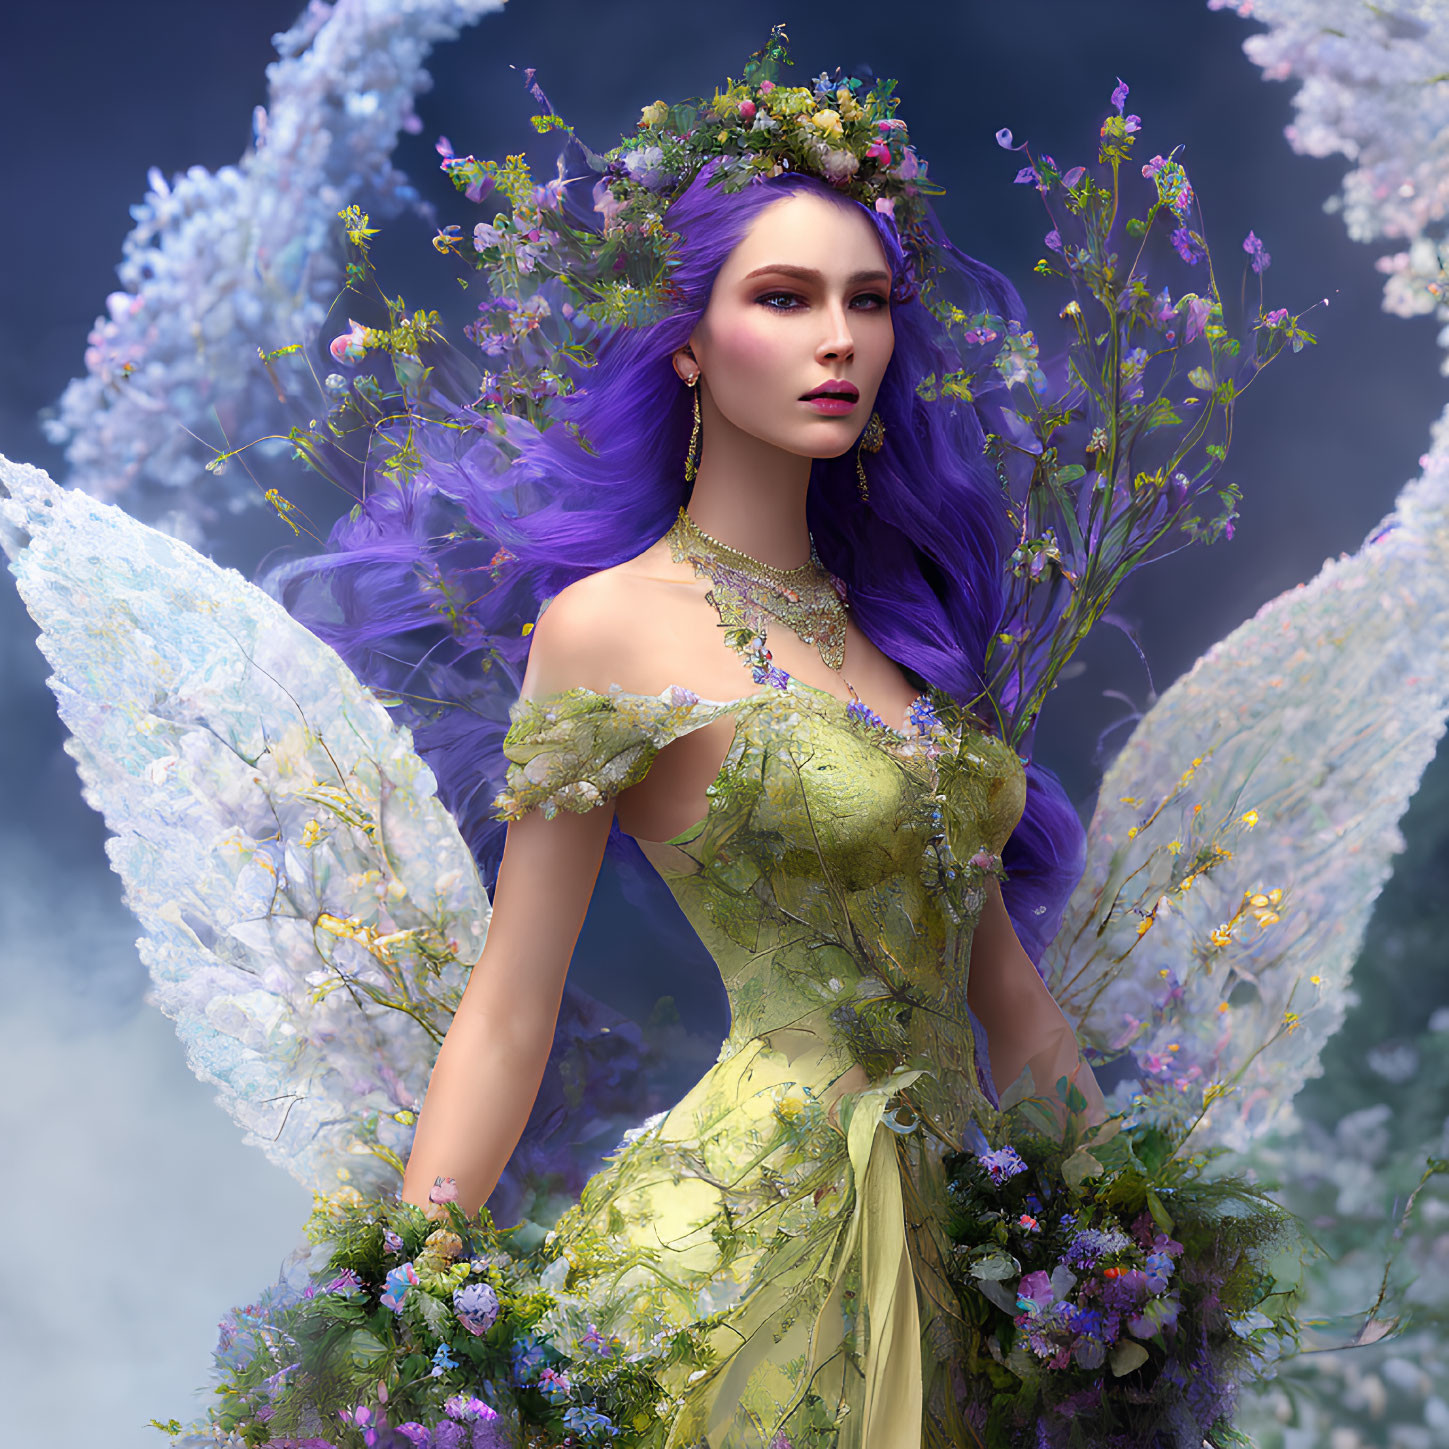 Vibrant purple-haired fairy in green floral dress on misty blue backdrop